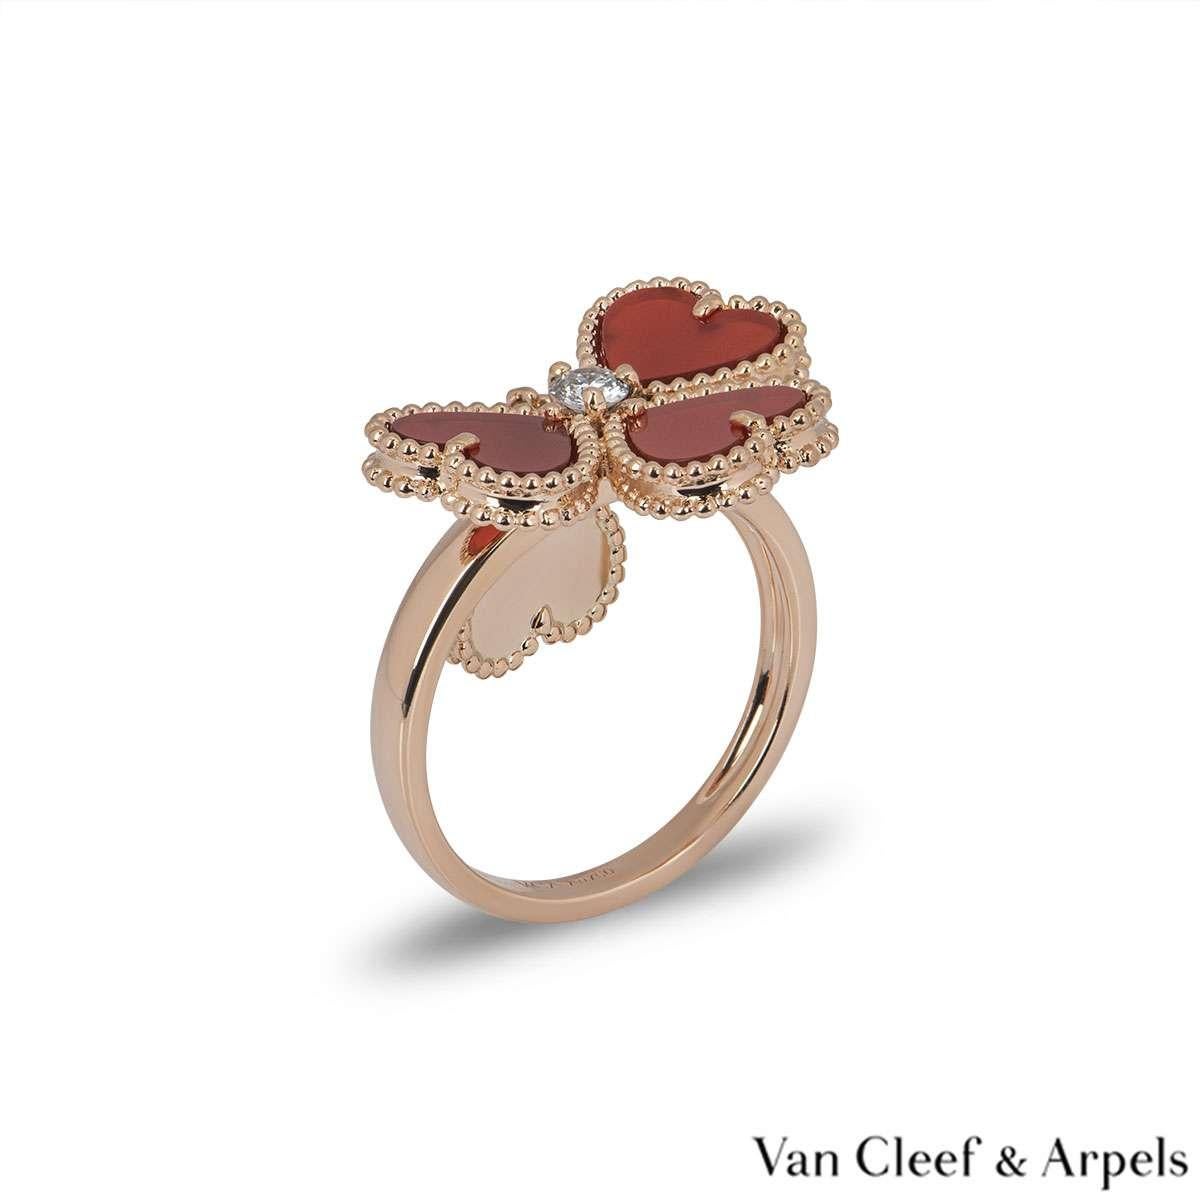 An elegant 18k rose gold Sweet Alhambra effeuillage ring by Van Cleef & Arpels. The ring features 4 heart motifs, each with a beaded outer edge and a carnelian centre. There is a single round brilliant cut 0.07ct diamond in the centre, with one of